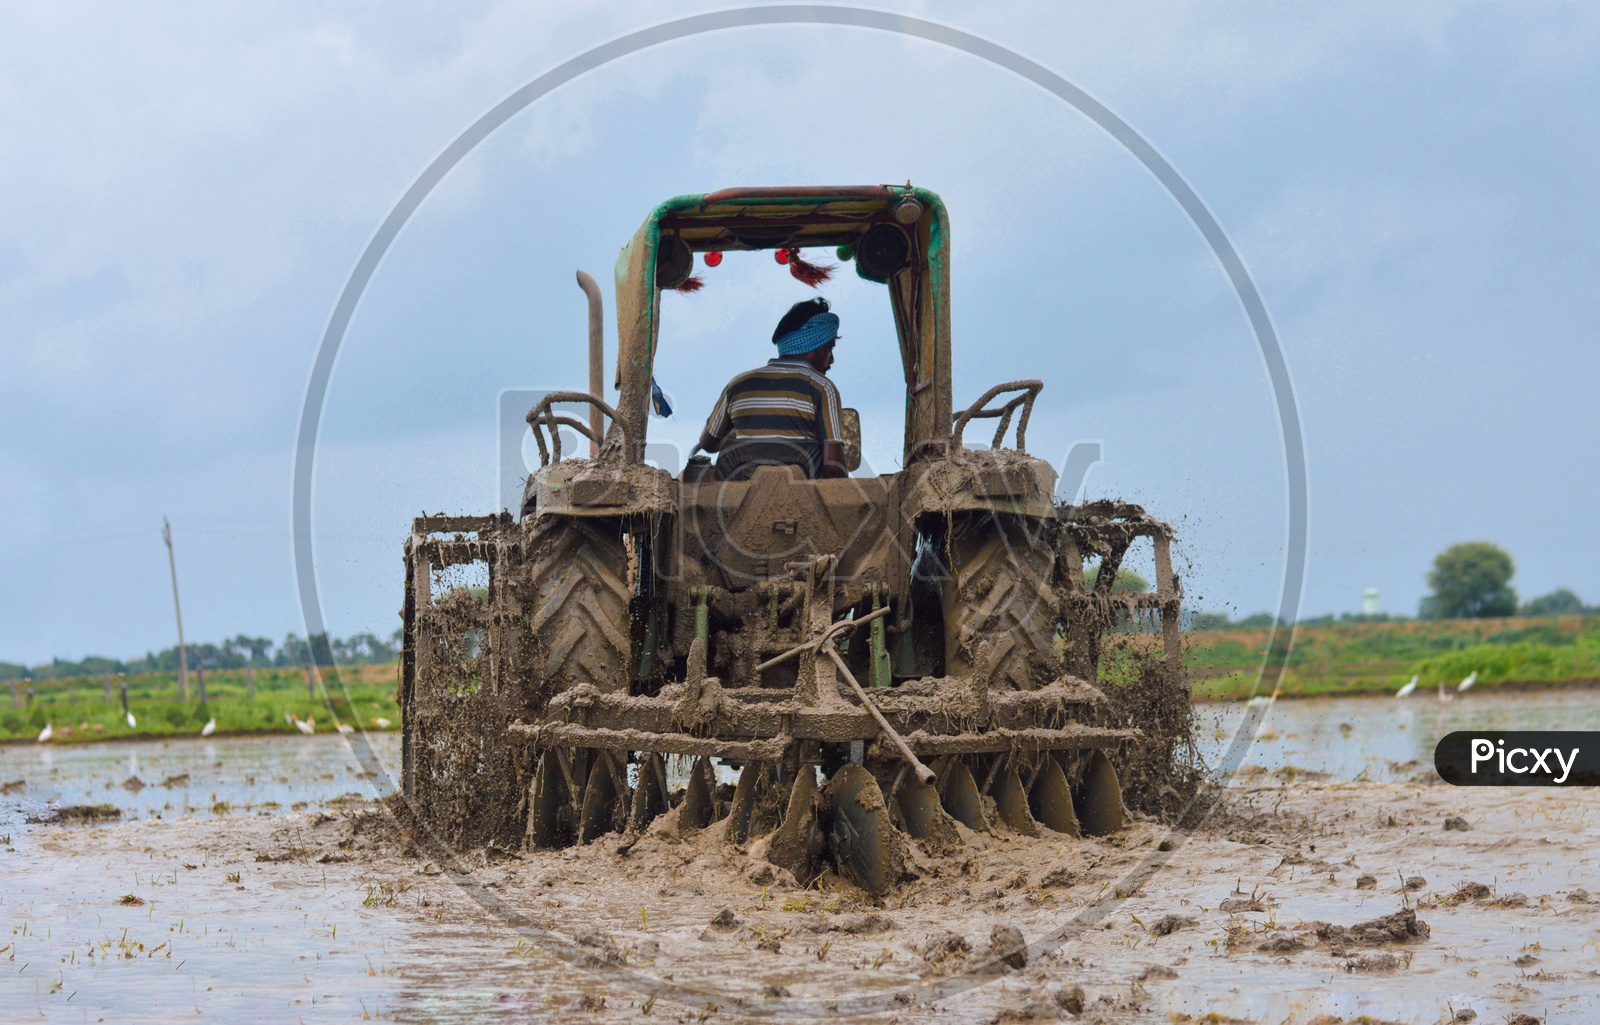 Farmer ploughing a rice paddy field with a tractor